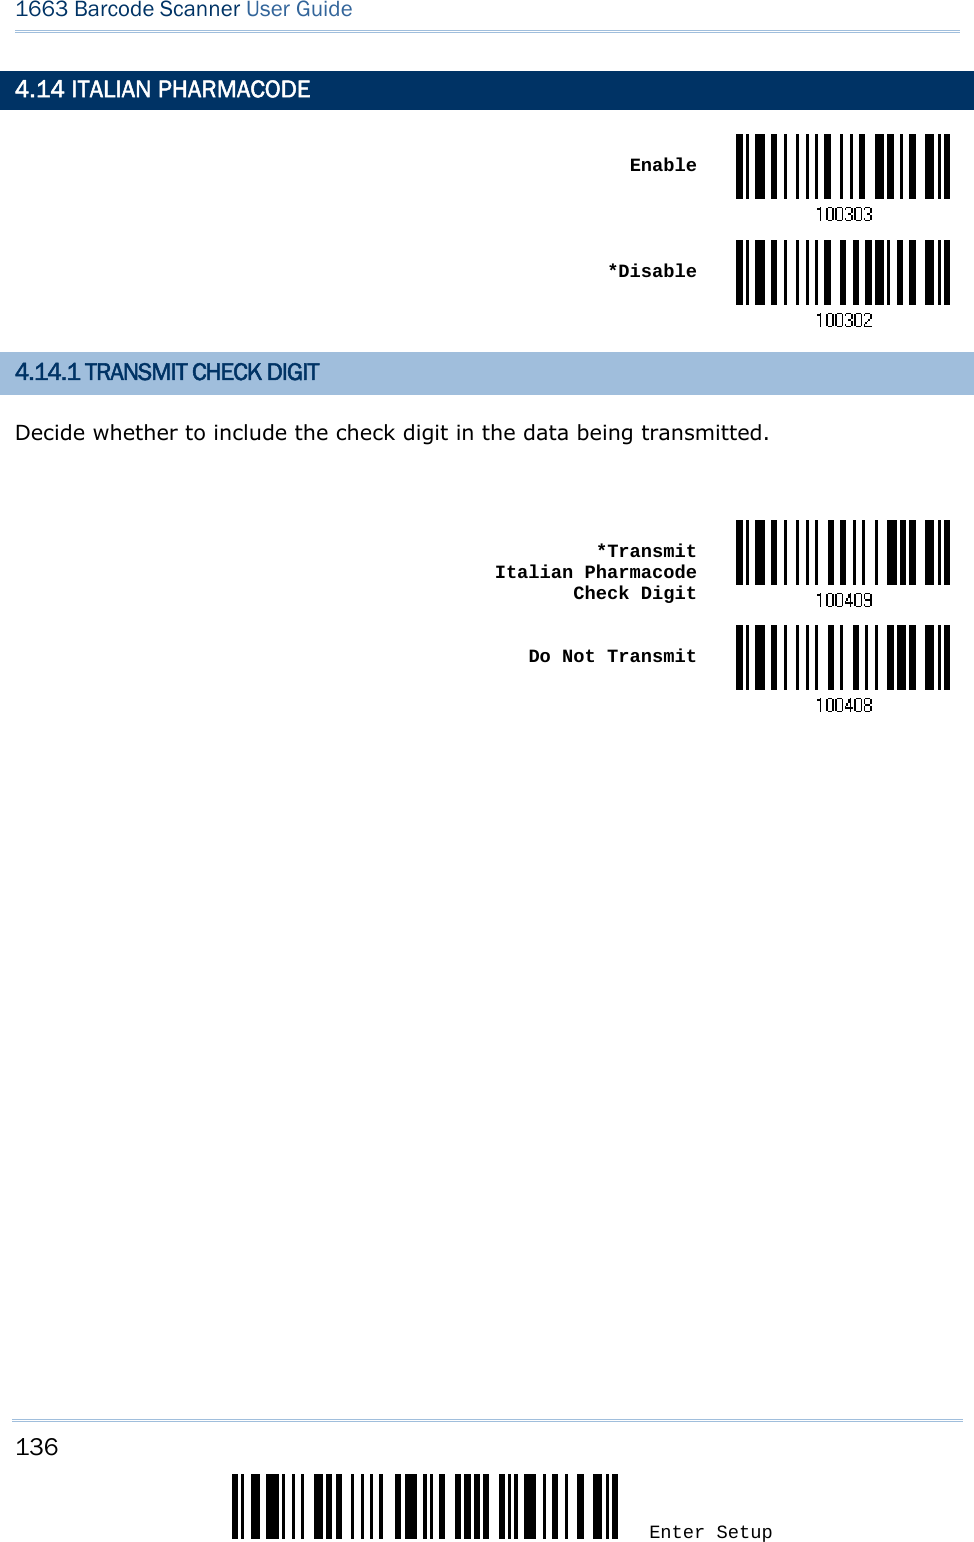 136 Enter Setup 1663 Barcode Scanner User Guide  4.14 ITALIAN PHARMACODE  Enable *Disable4.14.1 TRANSMIT CHECK DIGIT Decide whether to include the check digit in the data being transmitted.   *Transmit  Italian Pharmacode  Check Digit Do Not Transmit       